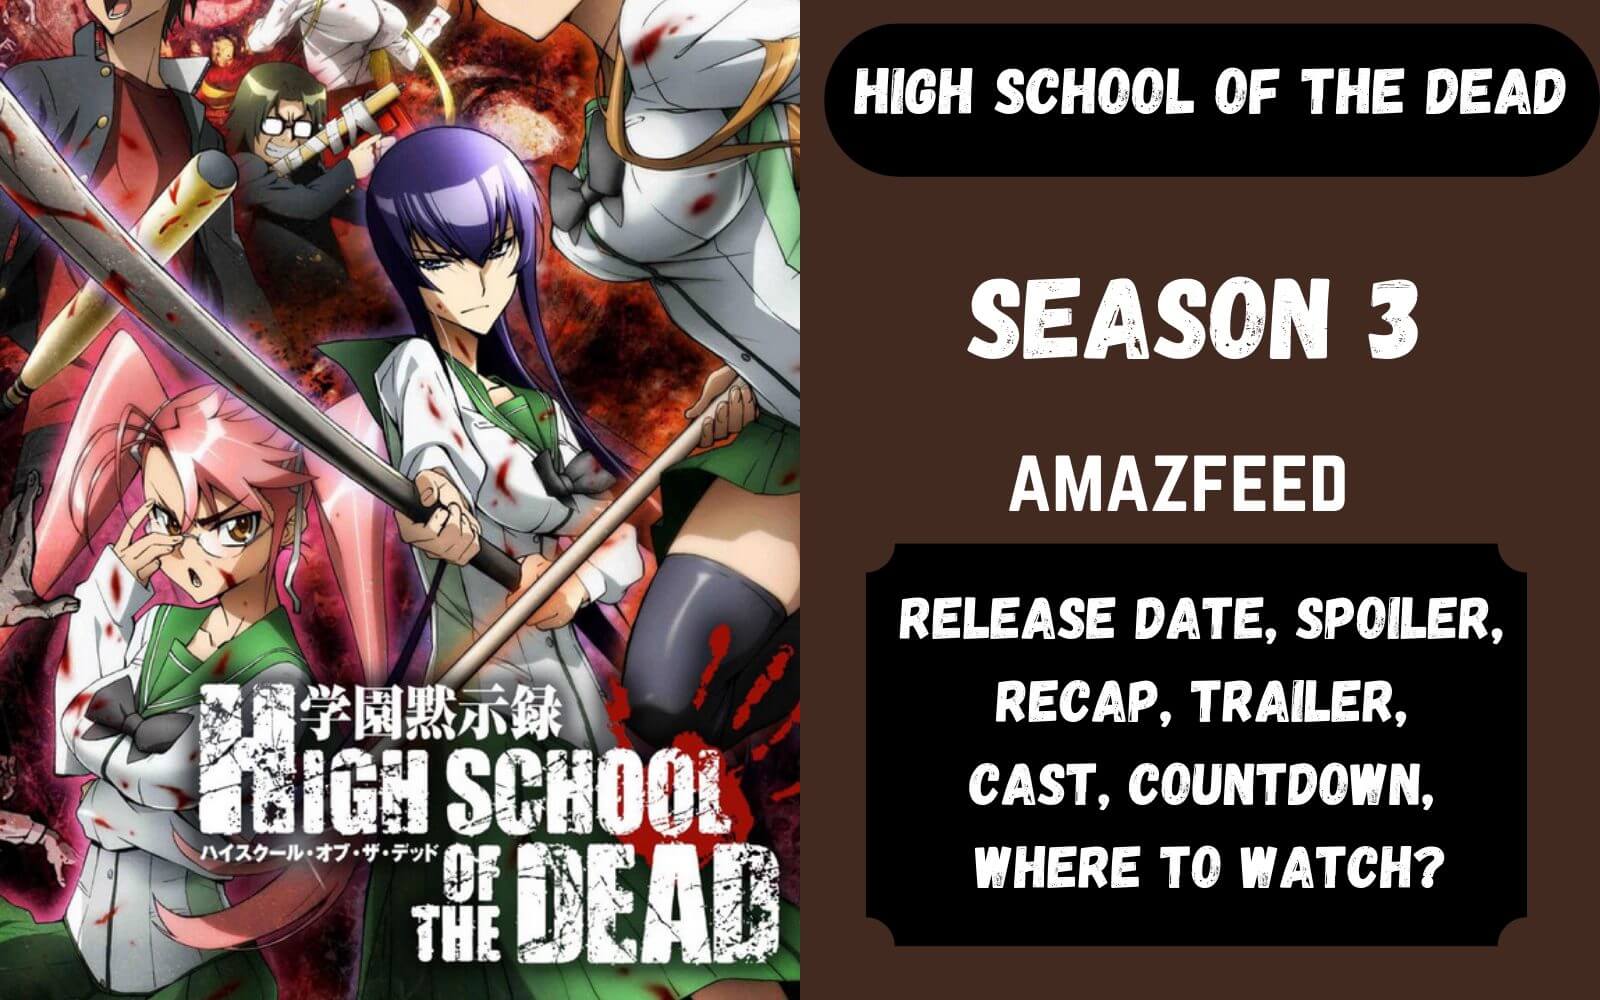 High School of the Dead is officially cancelled, according to the